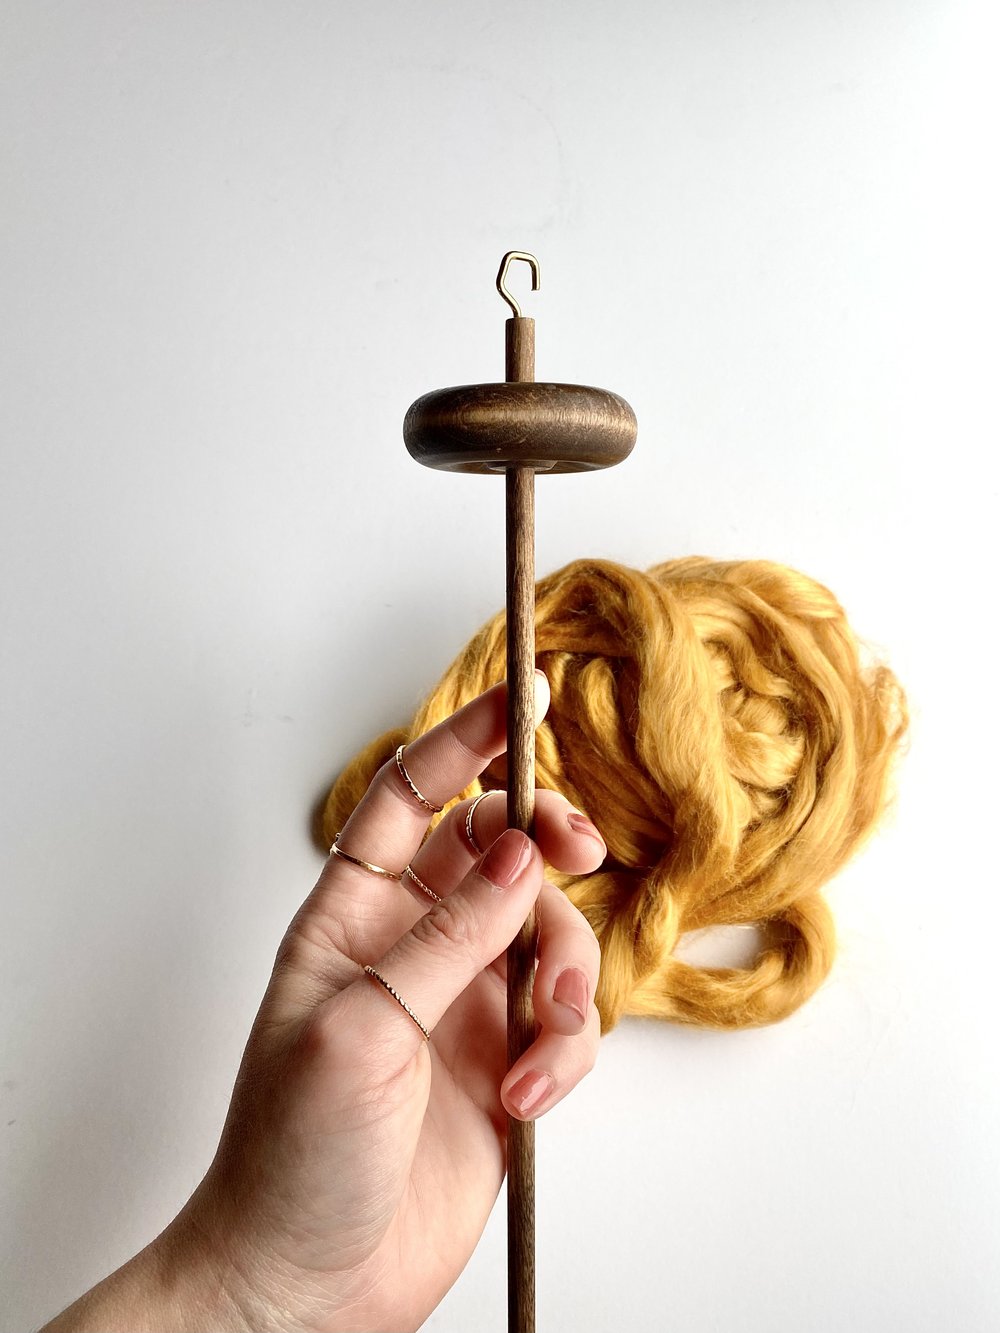 Drop Spindle Spinning: Making and Using Your First Spindle